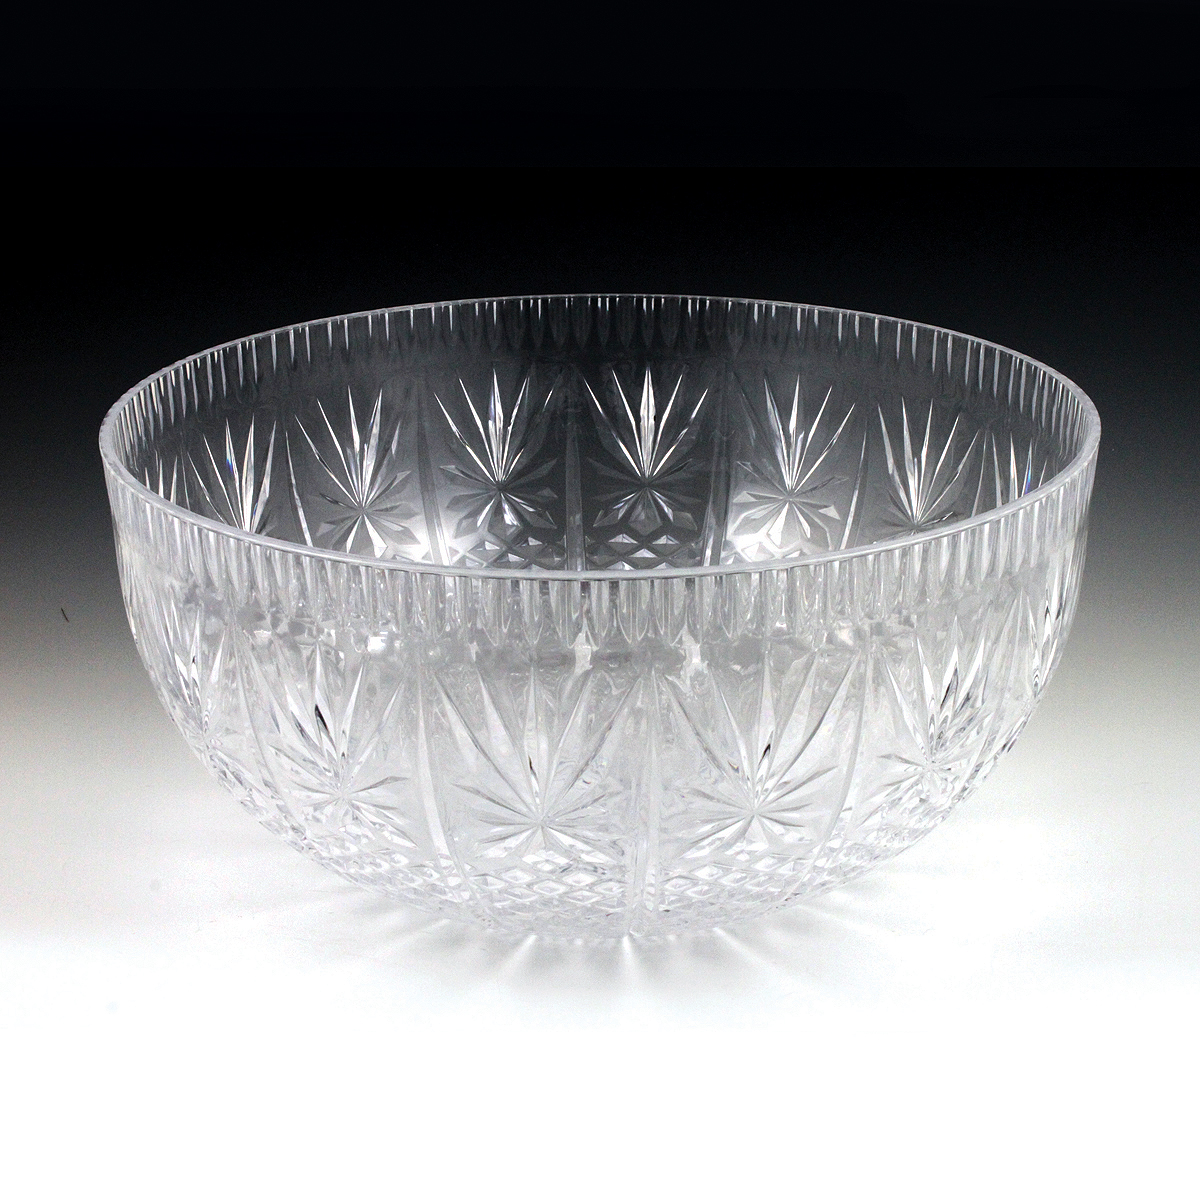 Crystalware Crystal Cut 1 Quart Clear Plastic Footed Bowl 